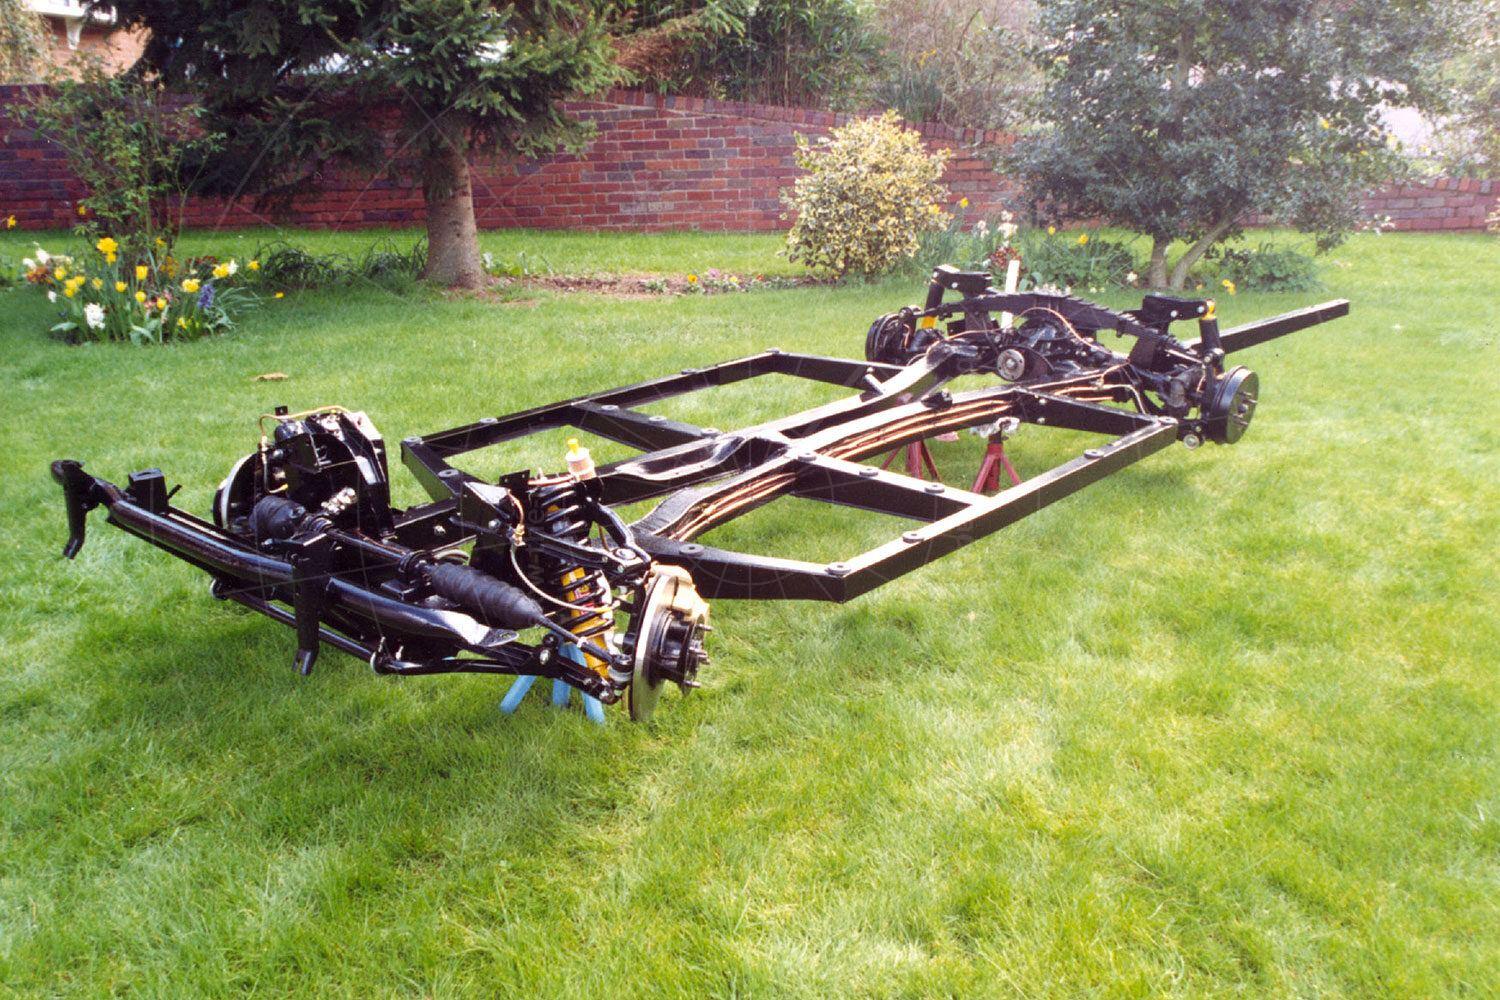 The first job was to get the rolling chassis sorted Pic: magiccarpics.co.uk | The first job was to get the rolling chassis sorted